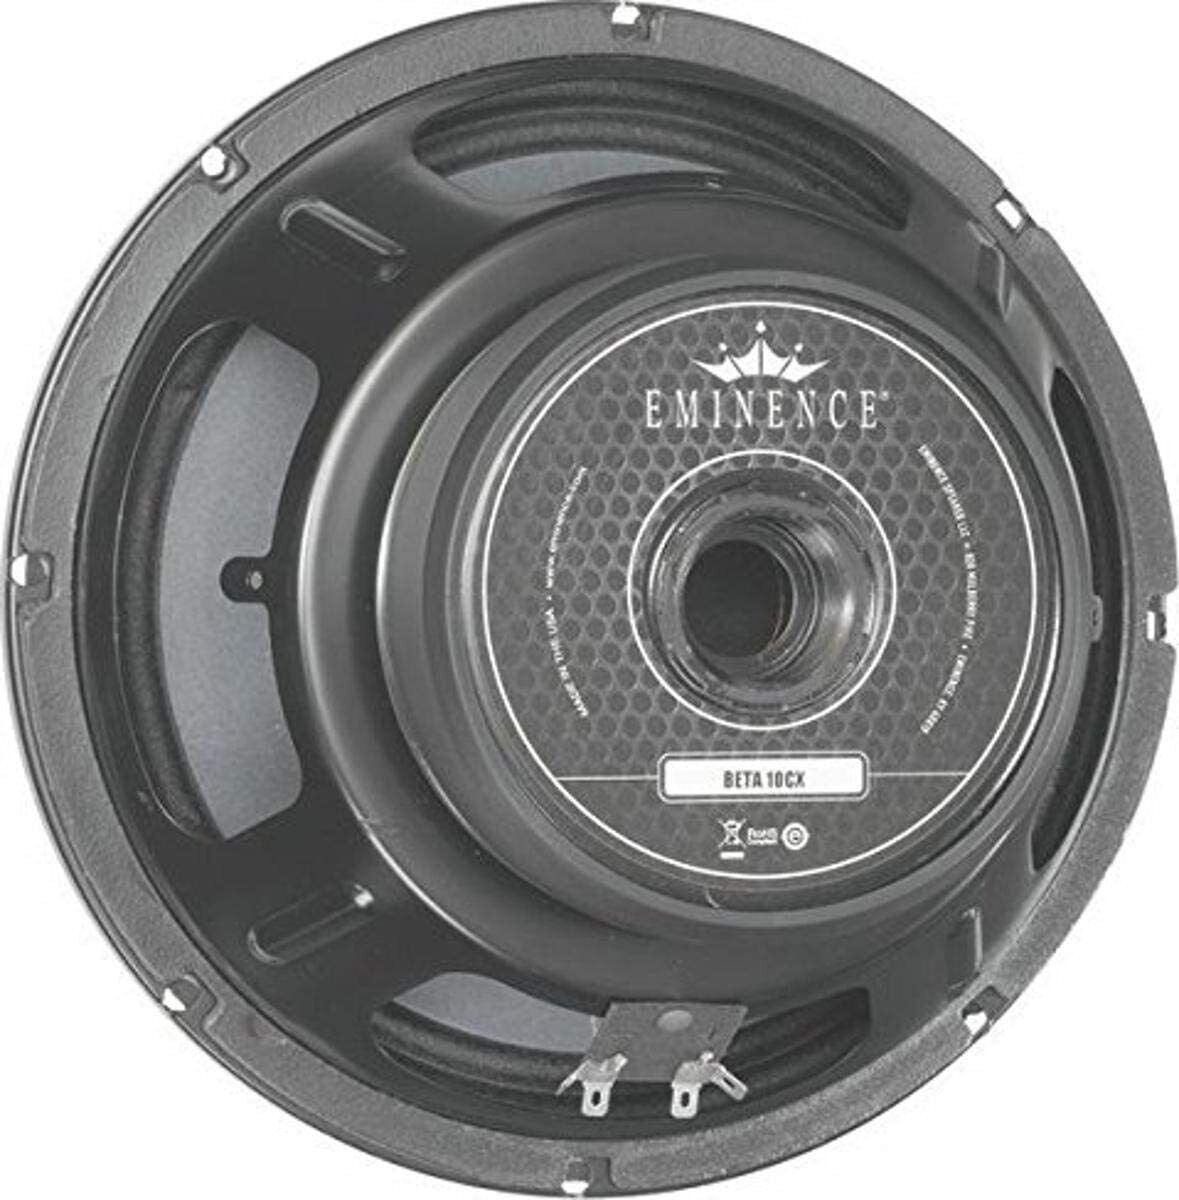 Primary image for Eminence - BETA-10CX - 10" Coaxial Mid-Bass Speaker 500 W - 8 Ohm